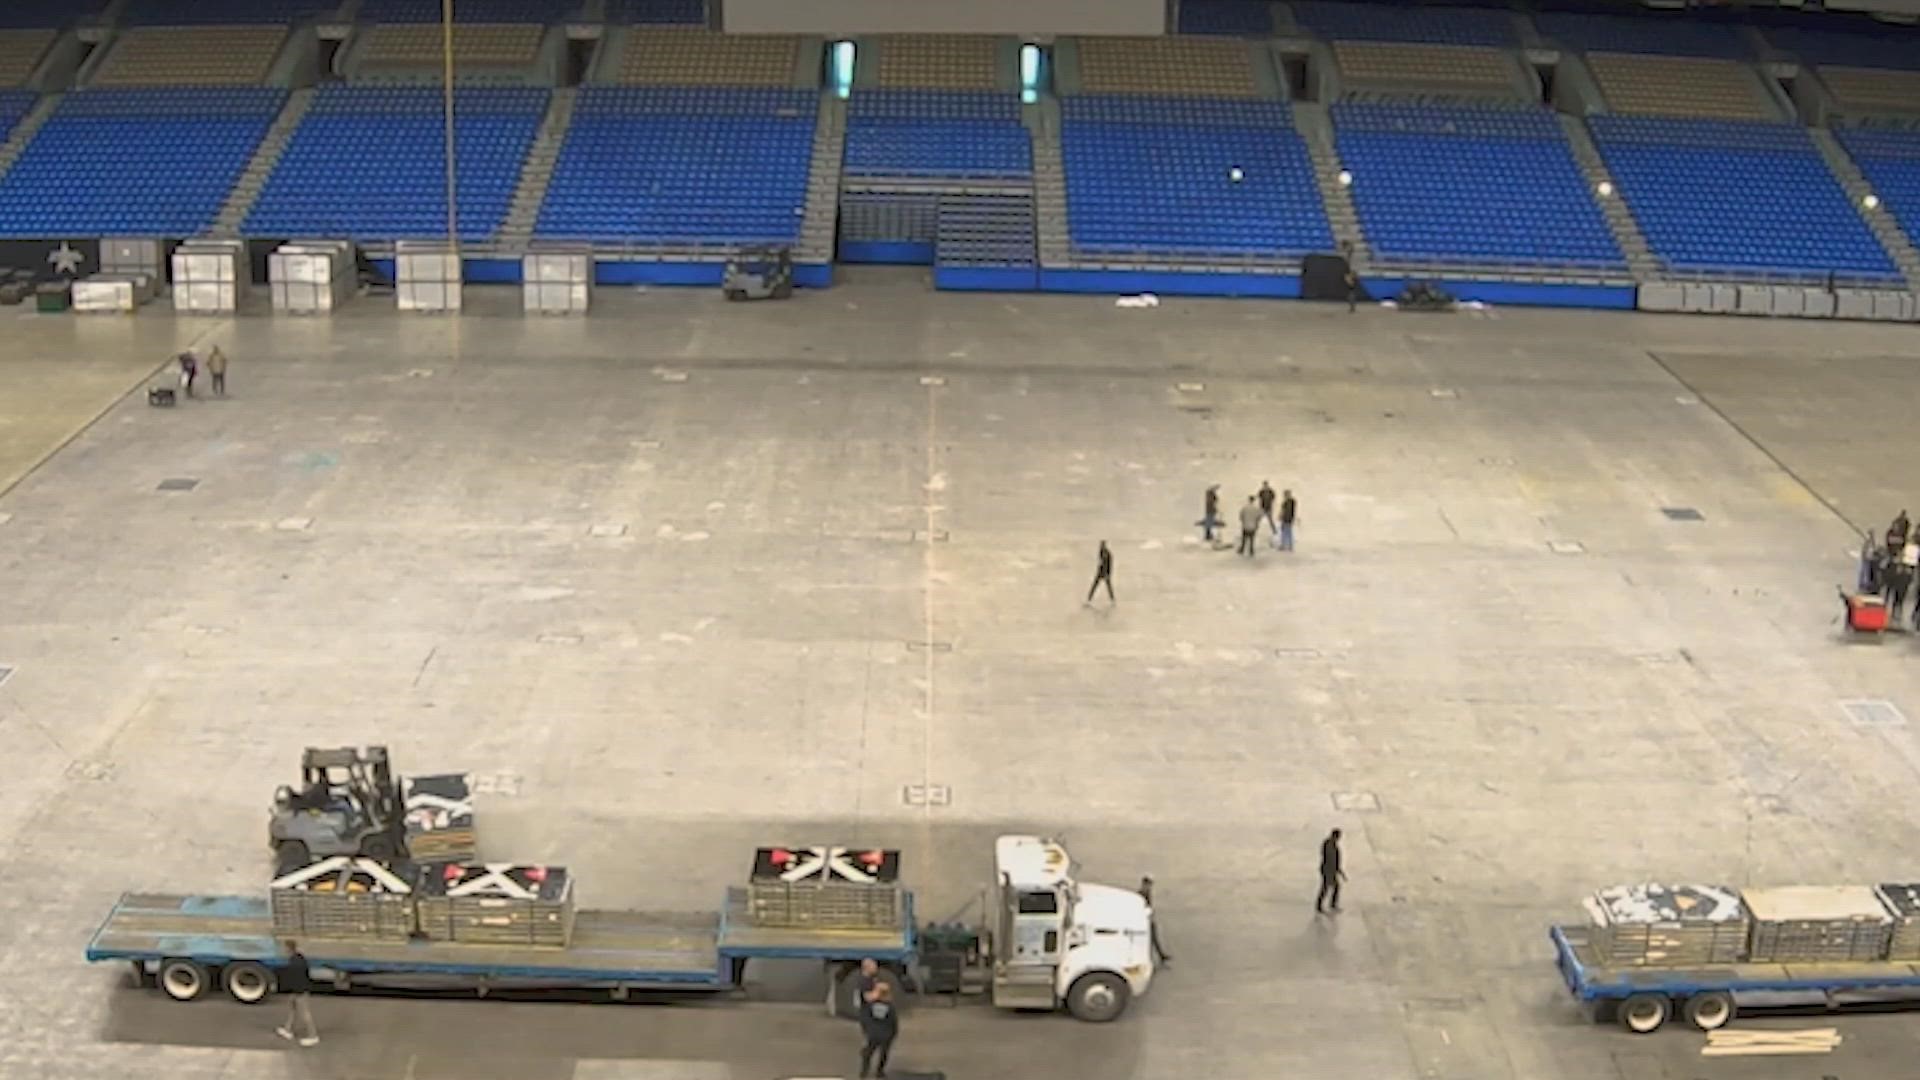 Timelapse video shows the basketball court being installed at the Alamodome.